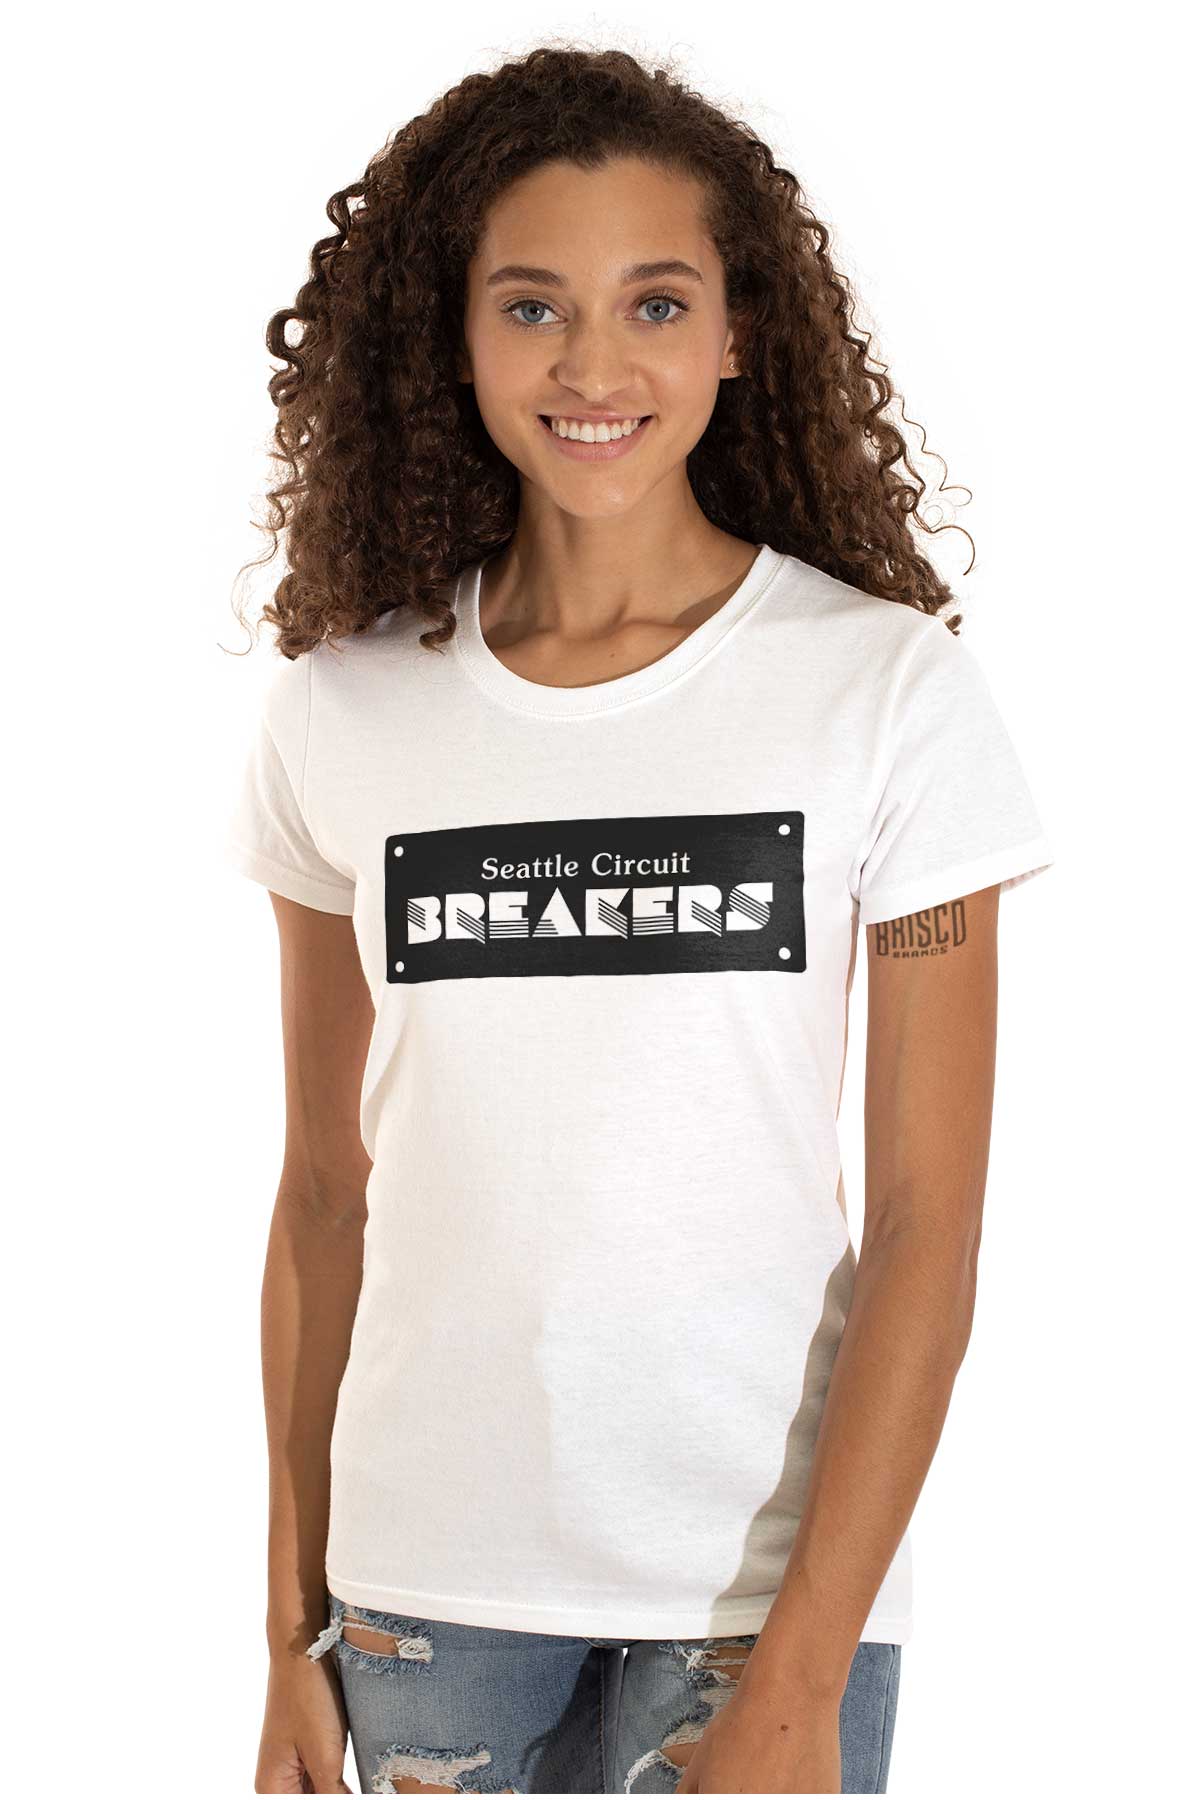 This design represents the vibrant energy of the 80s dance scene. It pays homage to the legendary breakers who amazed the crowd with their electrifying moves.